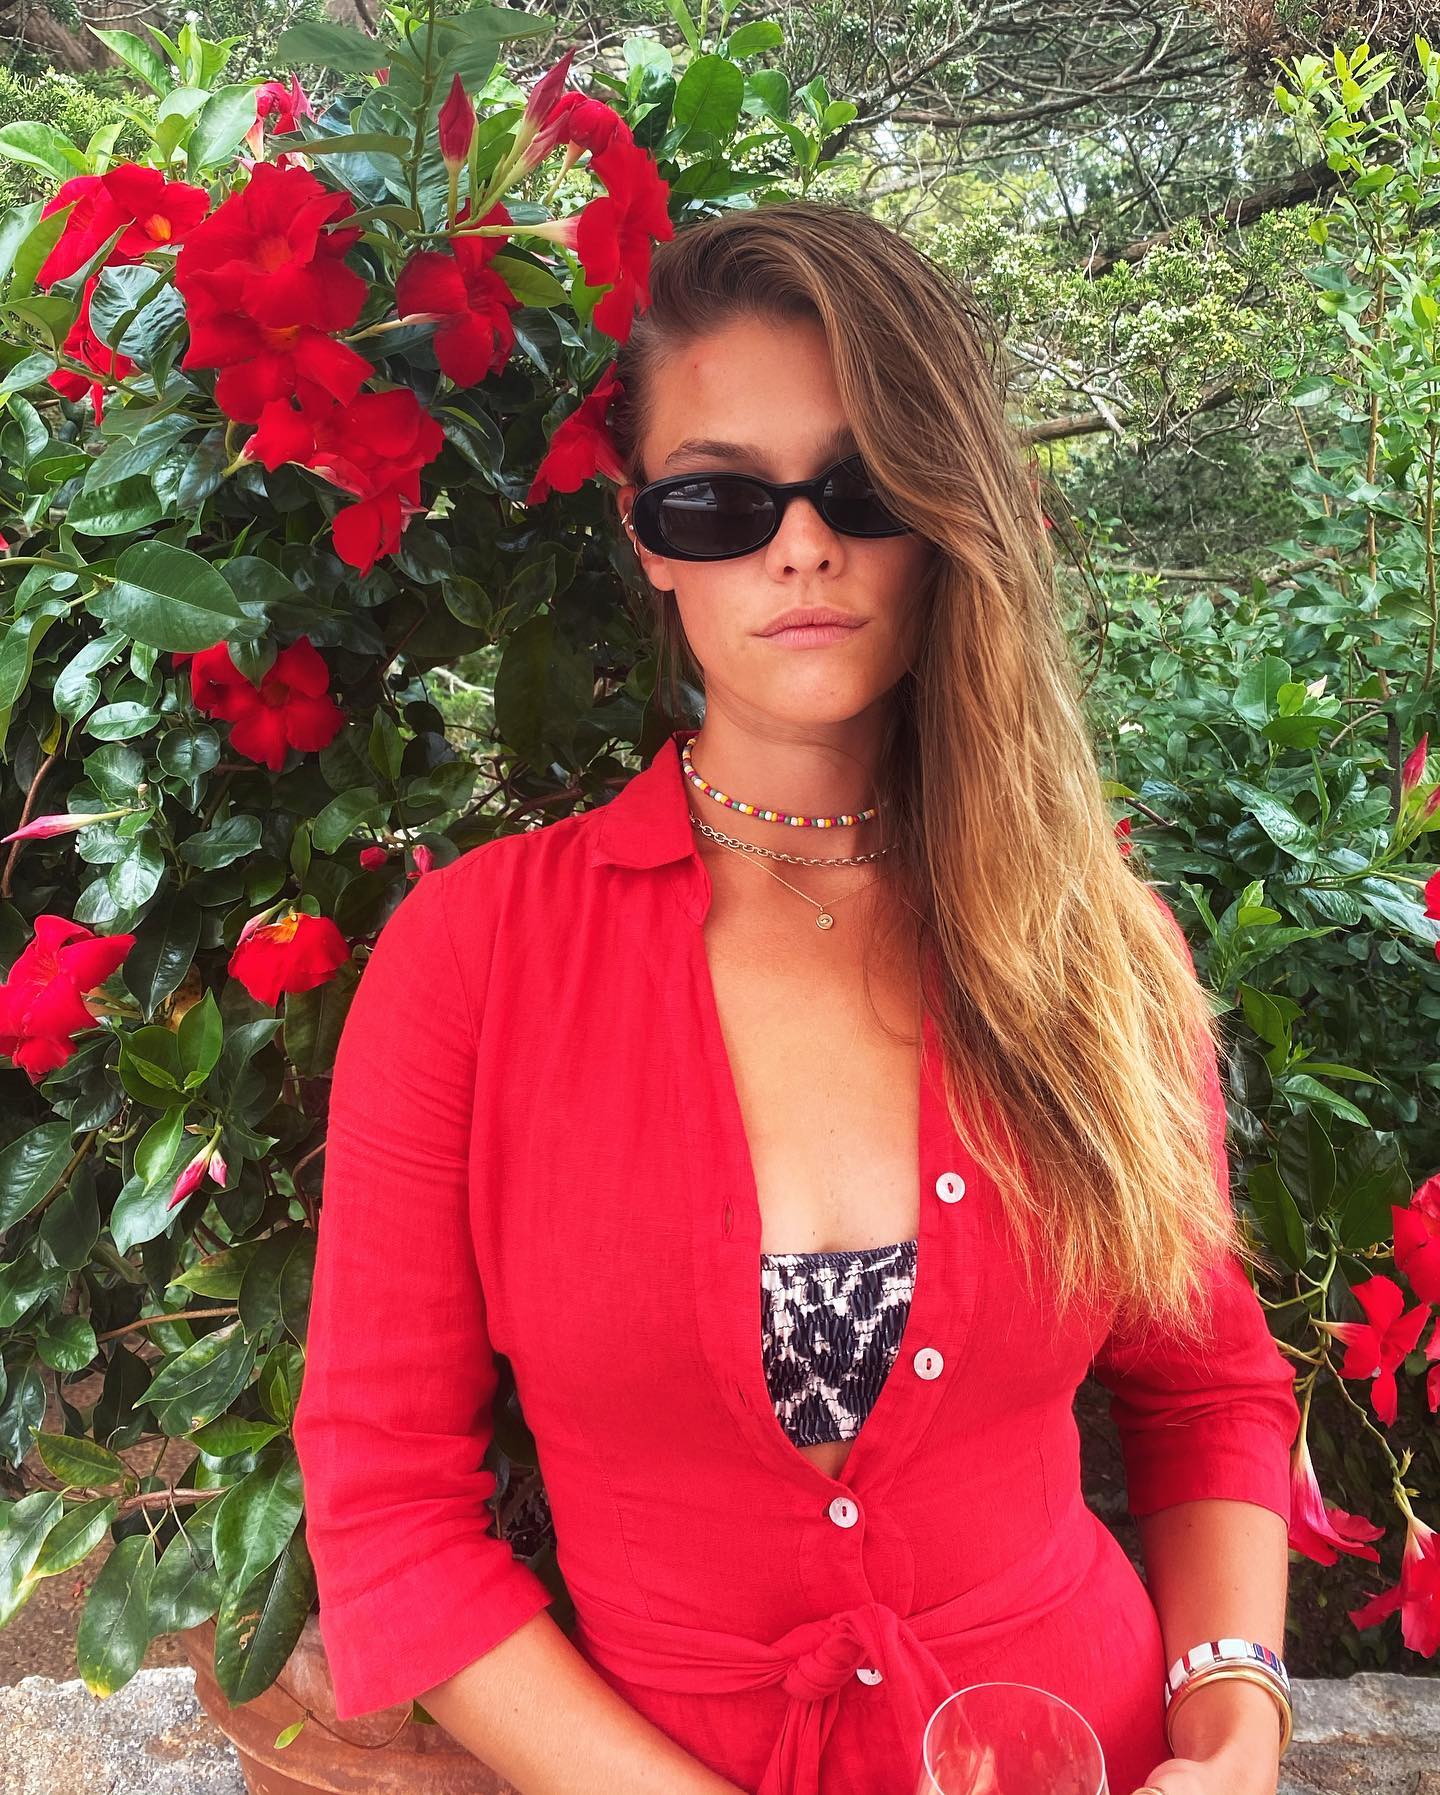 Photos n°3 : Nina Agdal is The Lady in Red!